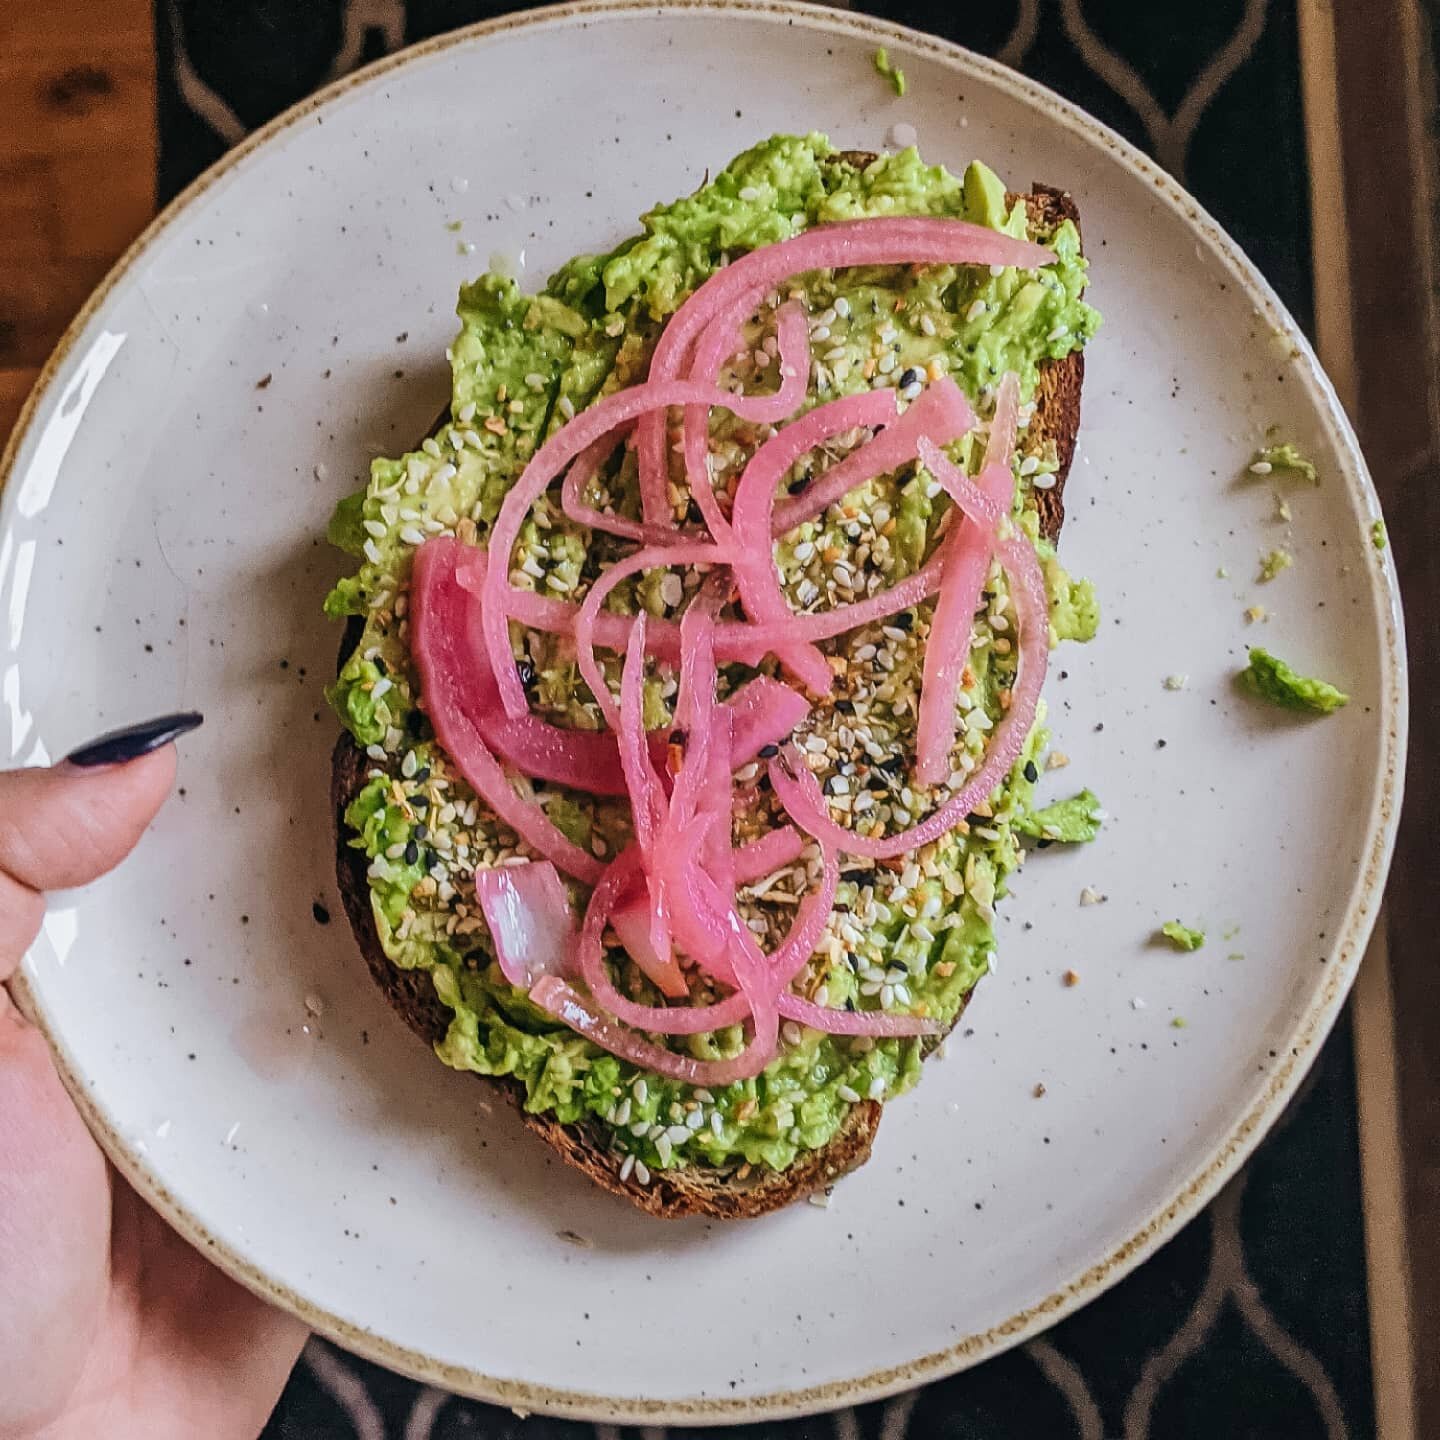 Some things never change
We just spice it up a little bit 💁🏼&zwj;♀️

Loving adding sumac (ultra healing for our bodies) and picked onions (hello gut health) to my classic sourdough avocado toast. 

Yes it's important to eat with intentional mindful